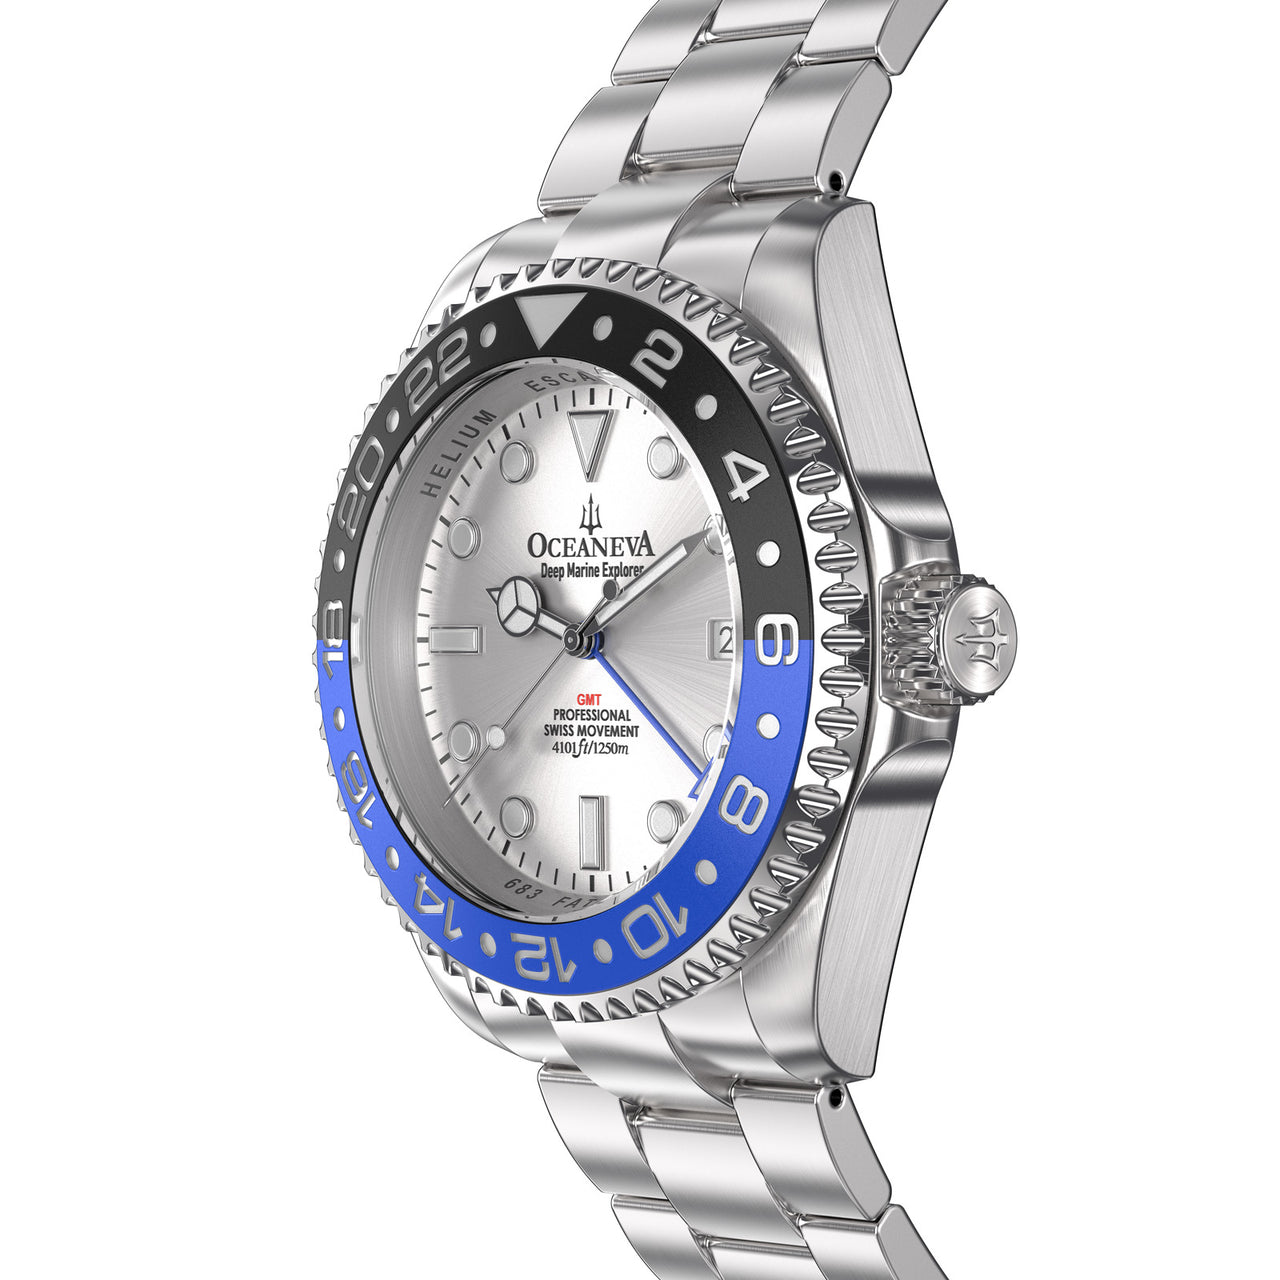 Oceaneva 1250M GMT Dive Watch Silver Blue And Black Side View Crown